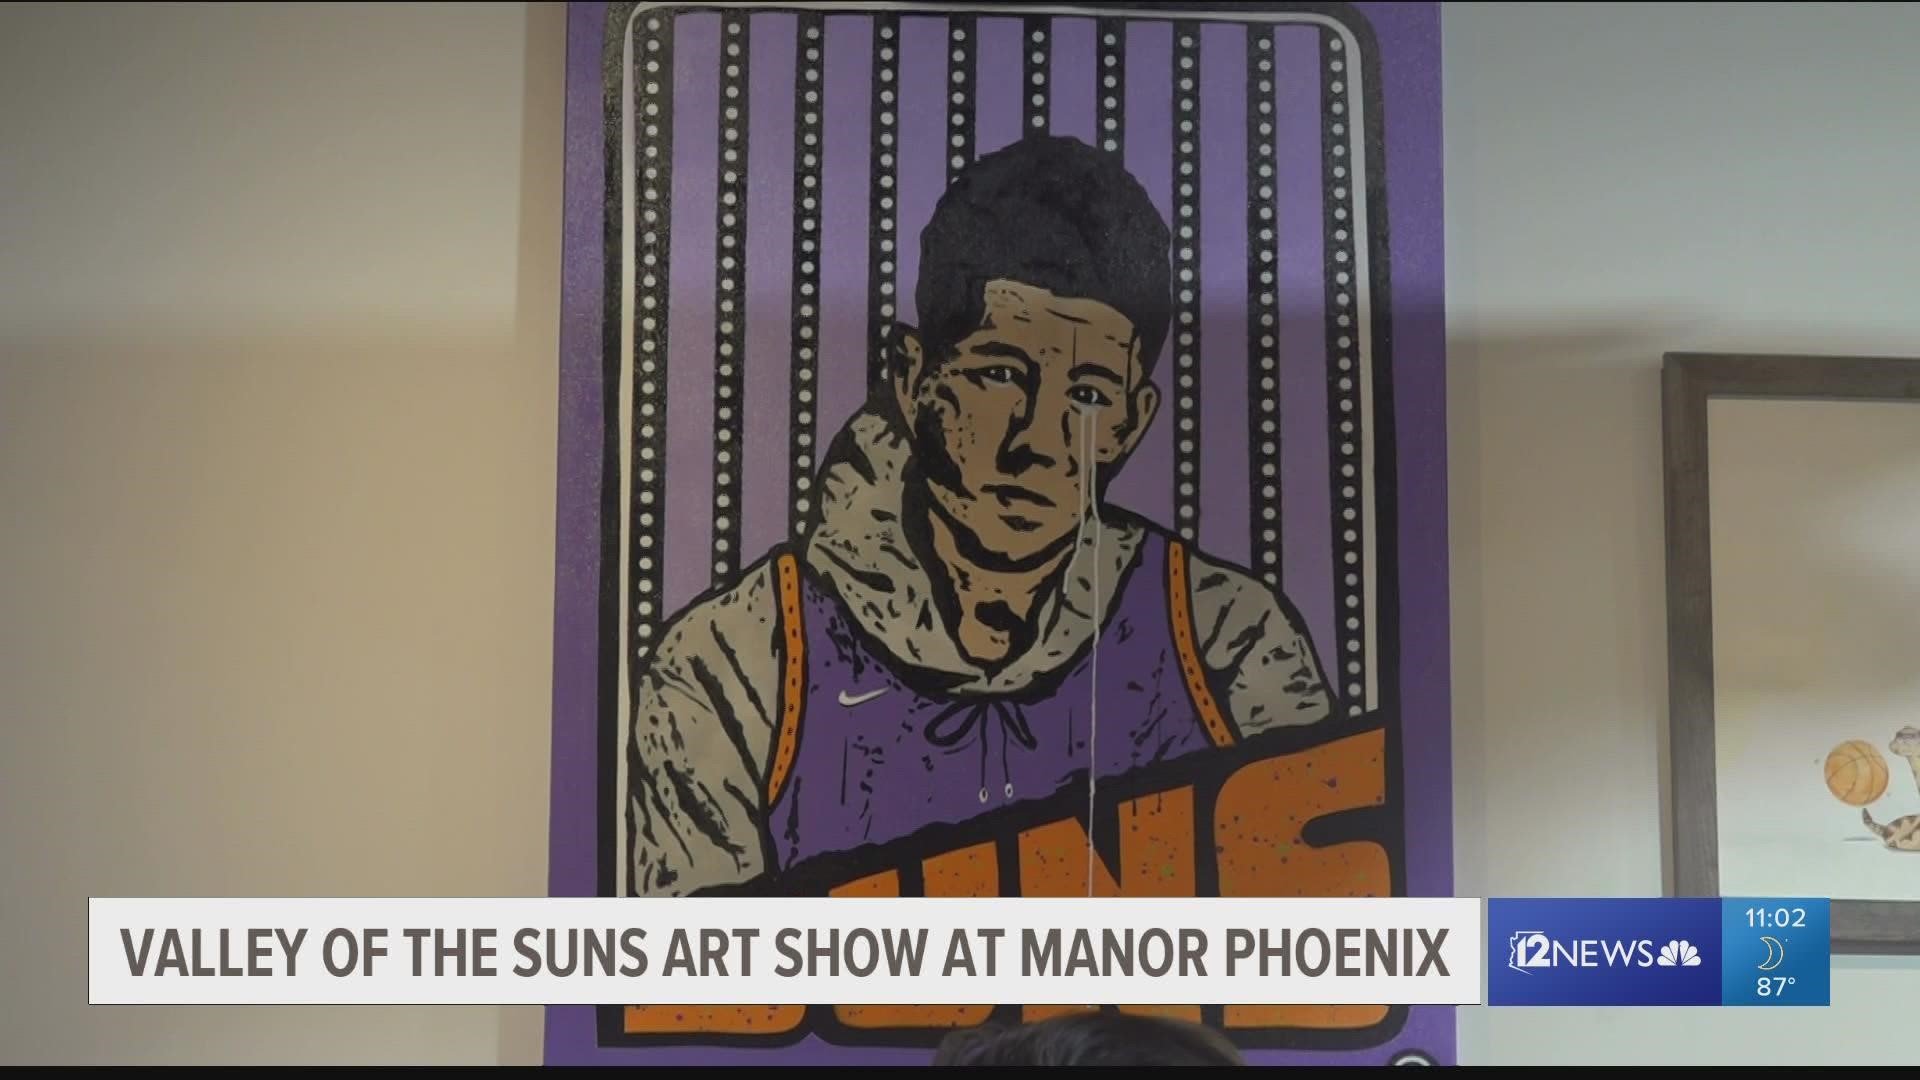 PhX Suns The Valley Concept - Font Identification 